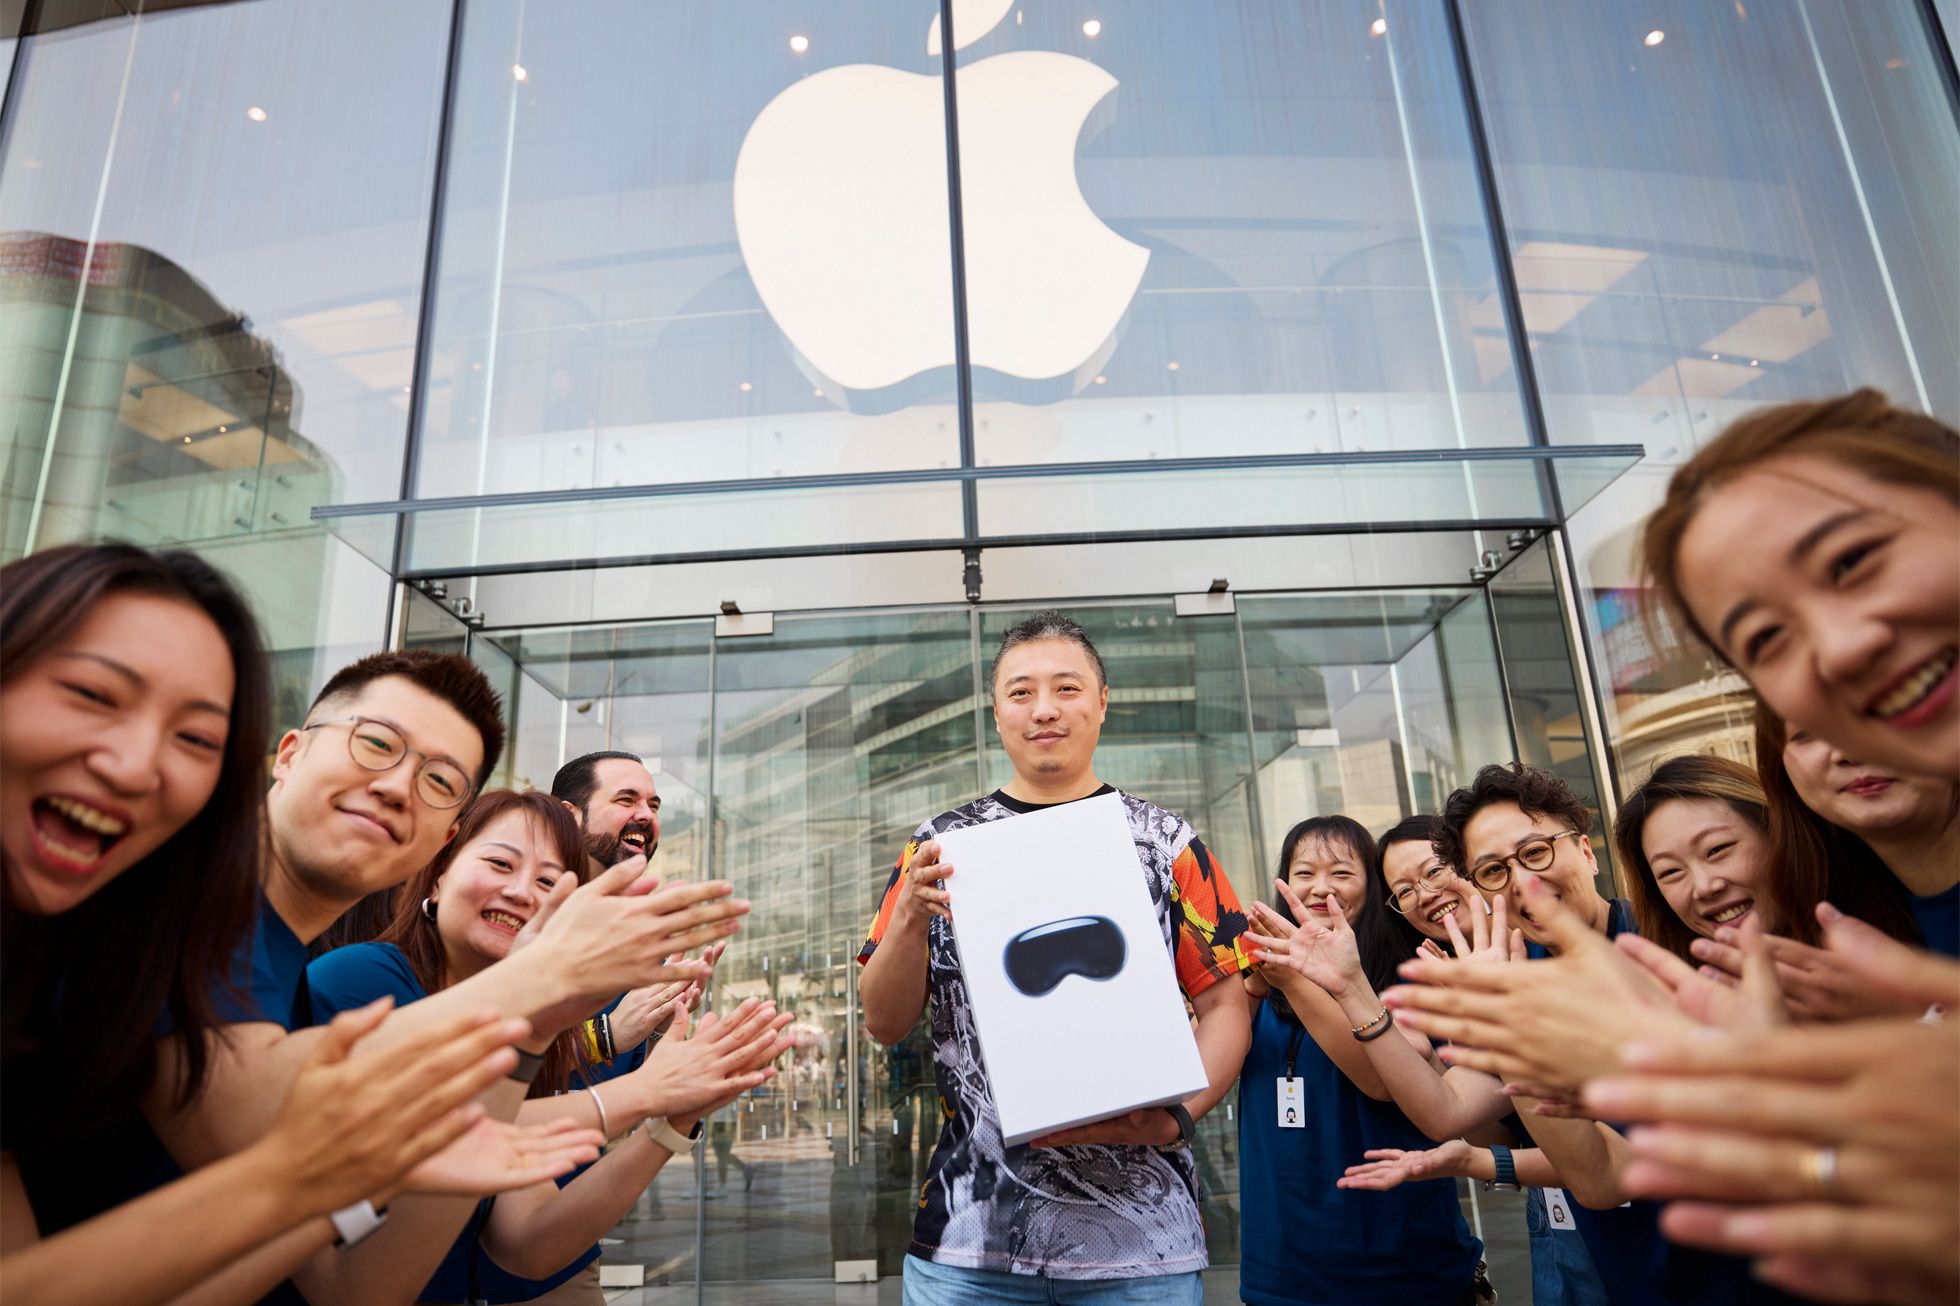 Apple's Vision Pro spatial computing headset today arrived at Apple Store locations across China mainland, Hong Kong, Japan, and Singapore. The launch